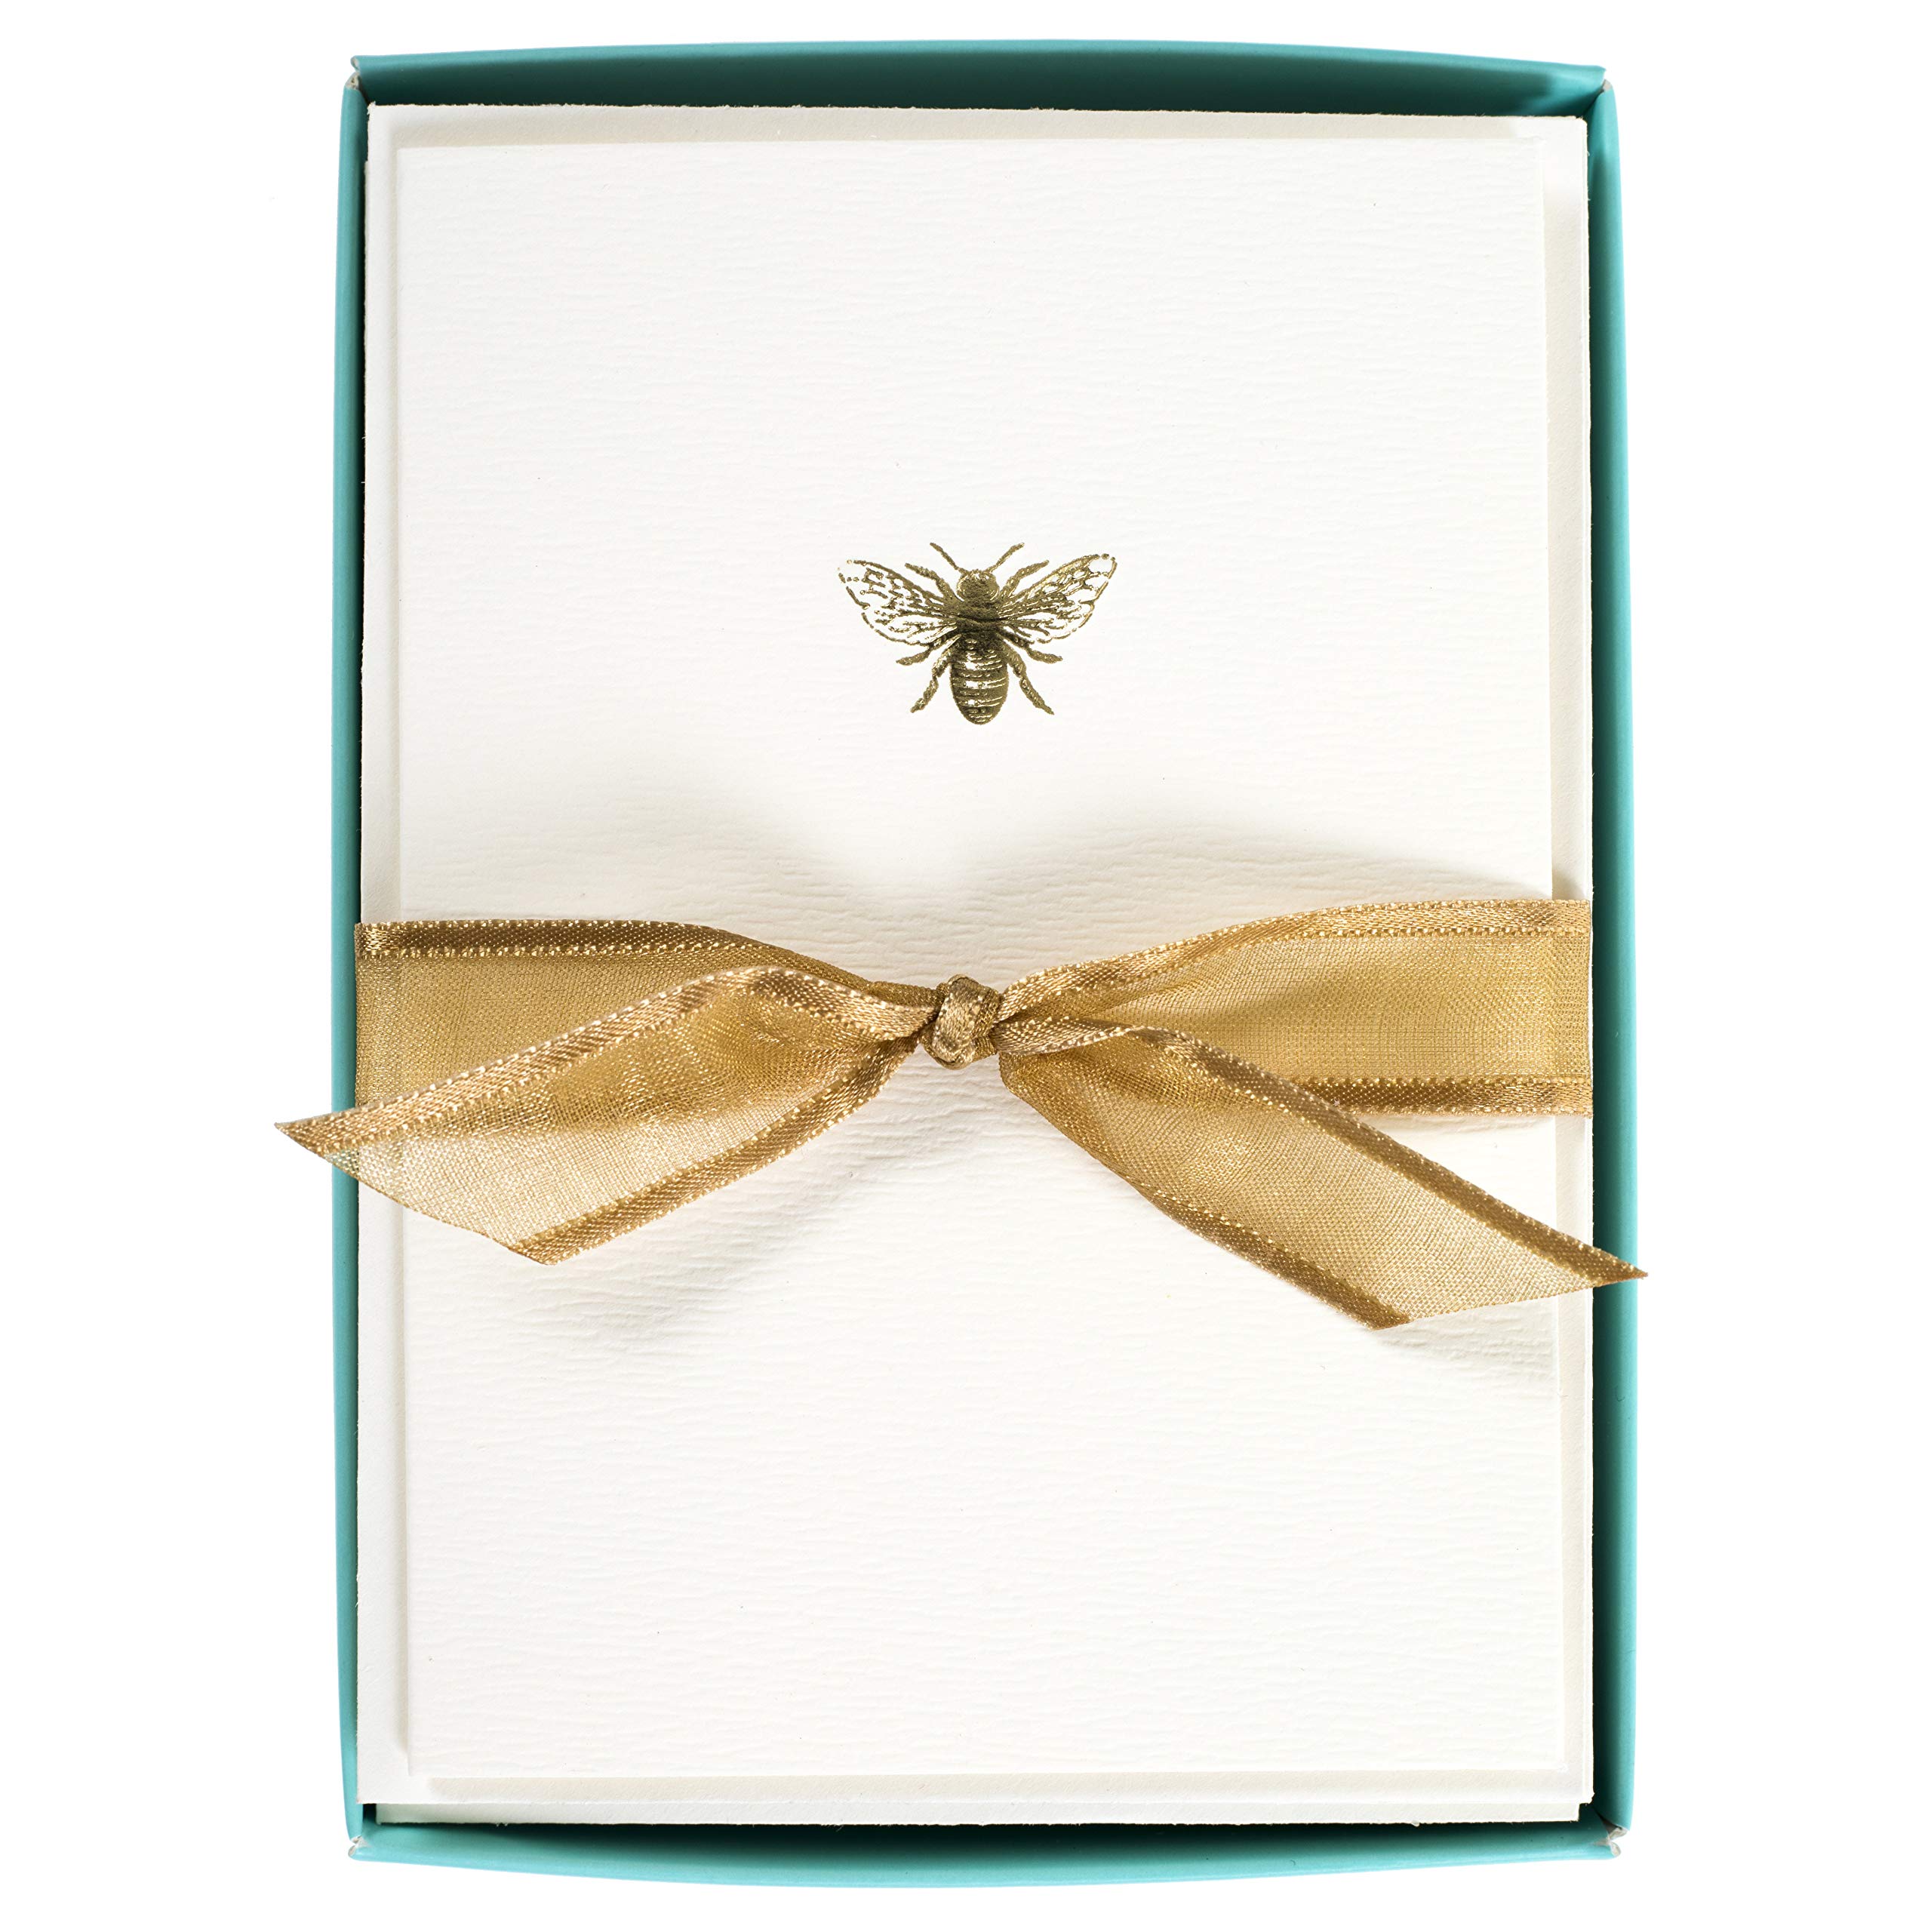 Graphique Bee La Petite Presse Boxed Notecards - 10 Embellished Gold Foil Blank Cards with Matching Envelopes and Storage Box, 3.25